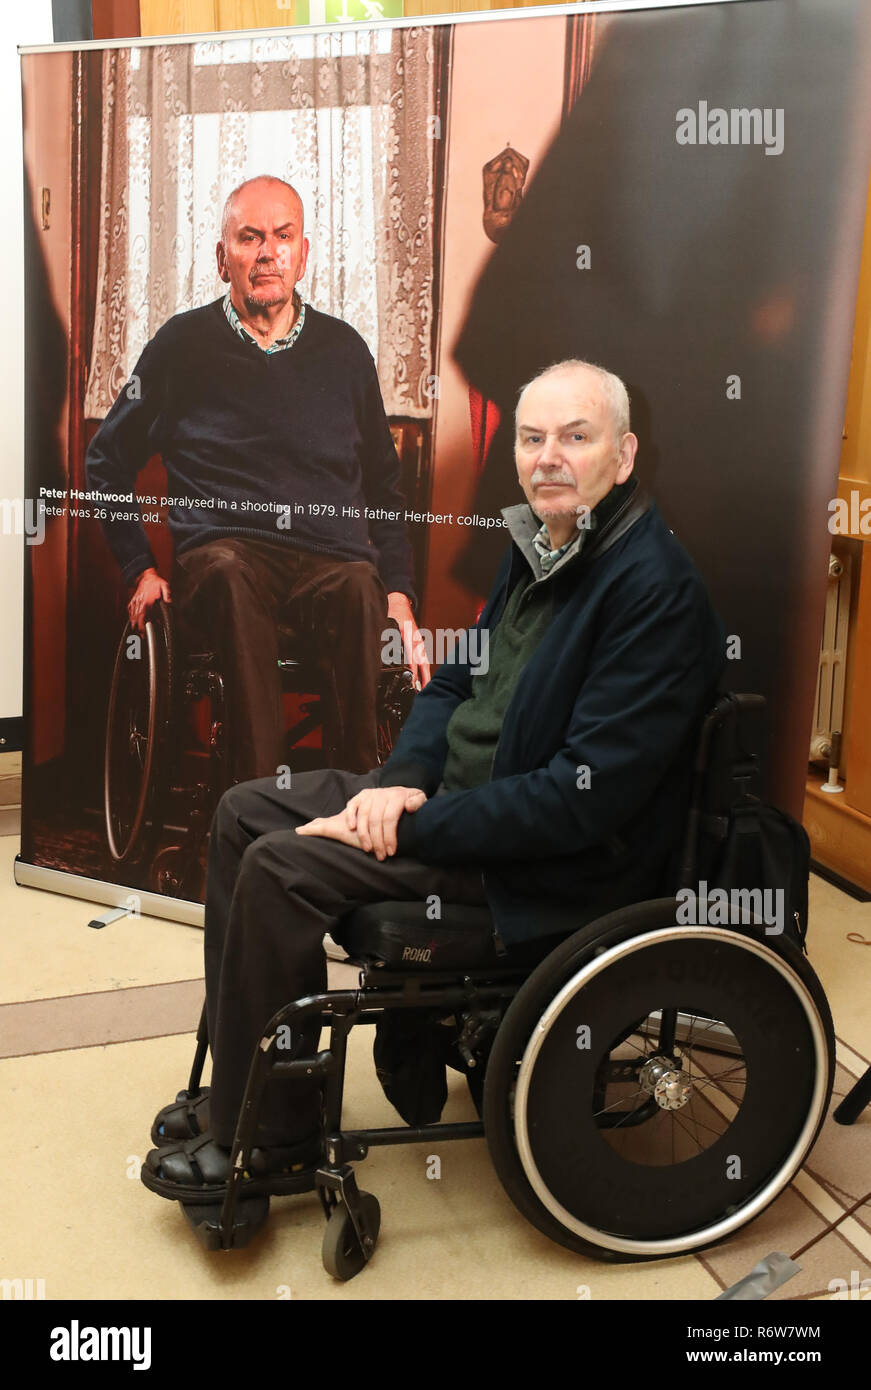 Peter Heathwood, who was paralysed in a shooting in 1979, who features in a new photographic exhibition by the WAVE Trauma campaign group on victims of the troubles at the Royal Victoria Hospital in Belfast. Stock Photo